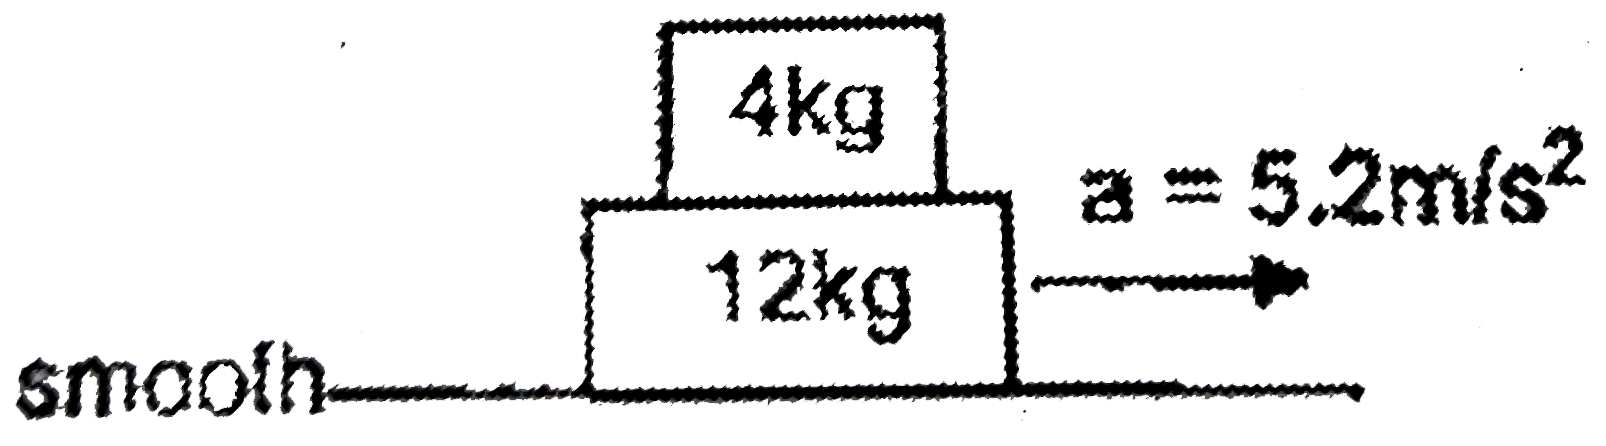 A 4 kg block ls placed on top of a long .12 kg block, which is accelerating along a smooth horizontal table at a= 5.2 m//s^(2) under application of an external constant force. Let minimum, coefficient of friction between the two blocks which will prevent the 4 kg block from sliding is mu, and coefficient of friction between blocks ls only half of this minimum value. of, (i.e., mu//2). Find the amount of heat (in joules) generated due to sliding between the two blocks during the time in which. 12 kg block moves 10 m starting from rest